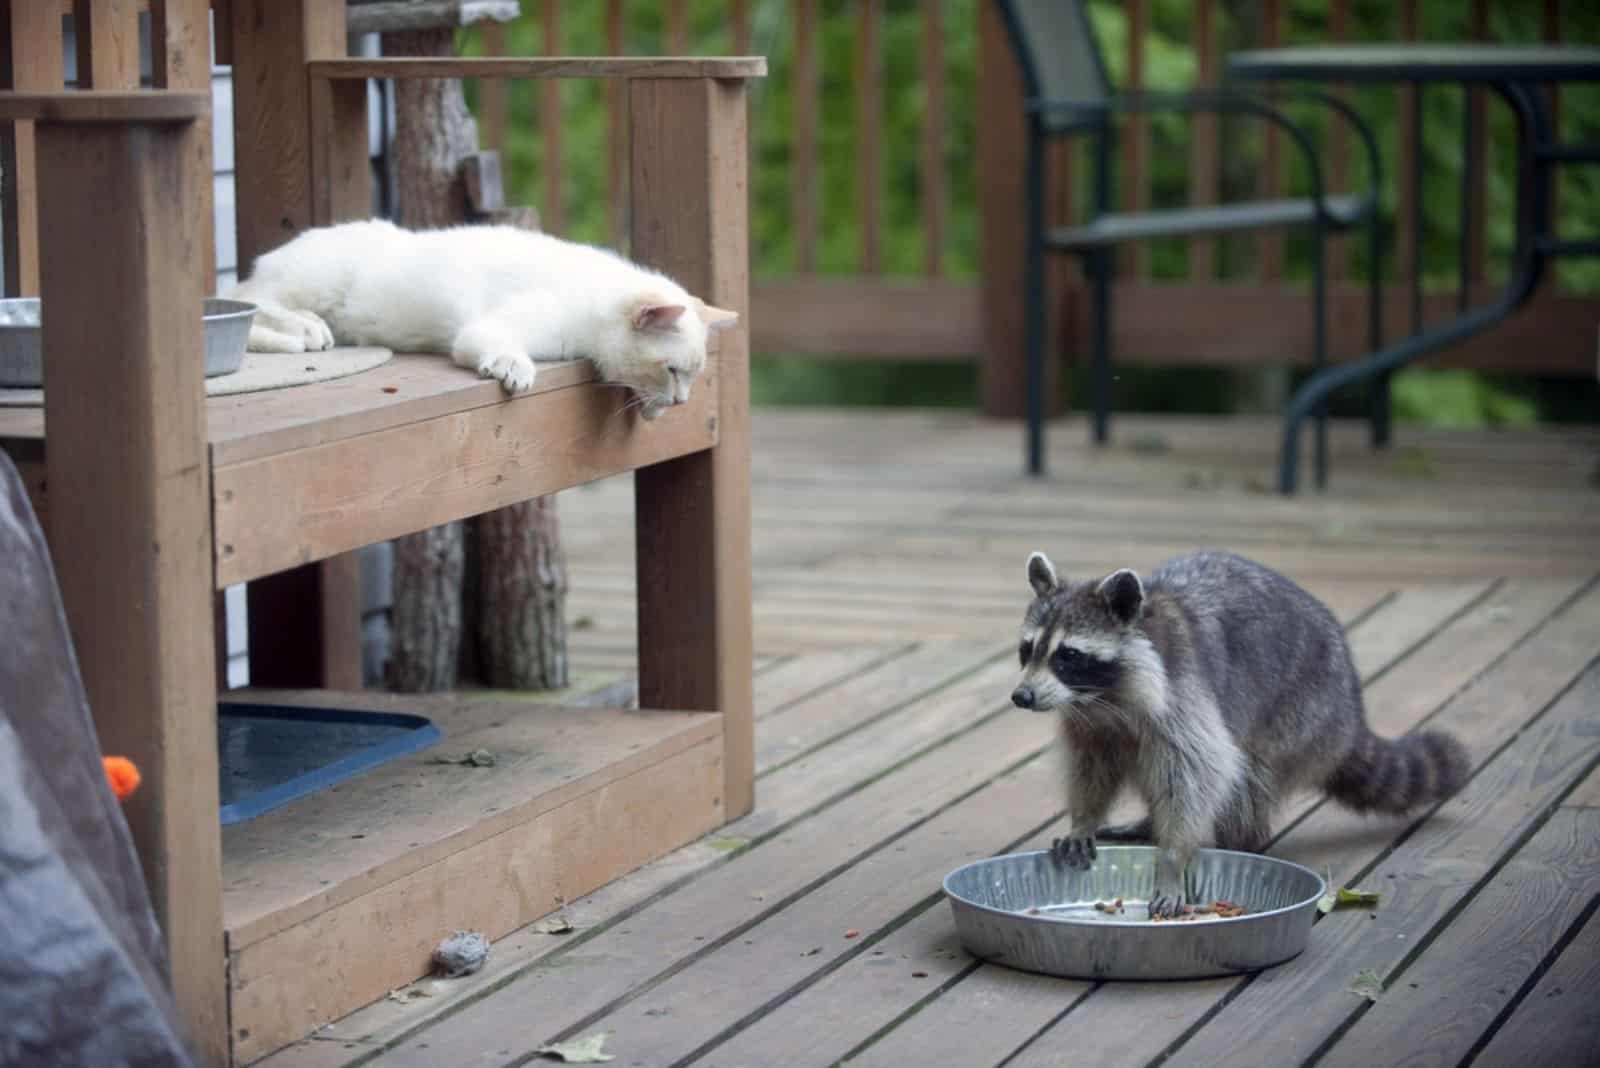 Kitten watching as raccoon moves in to steal food